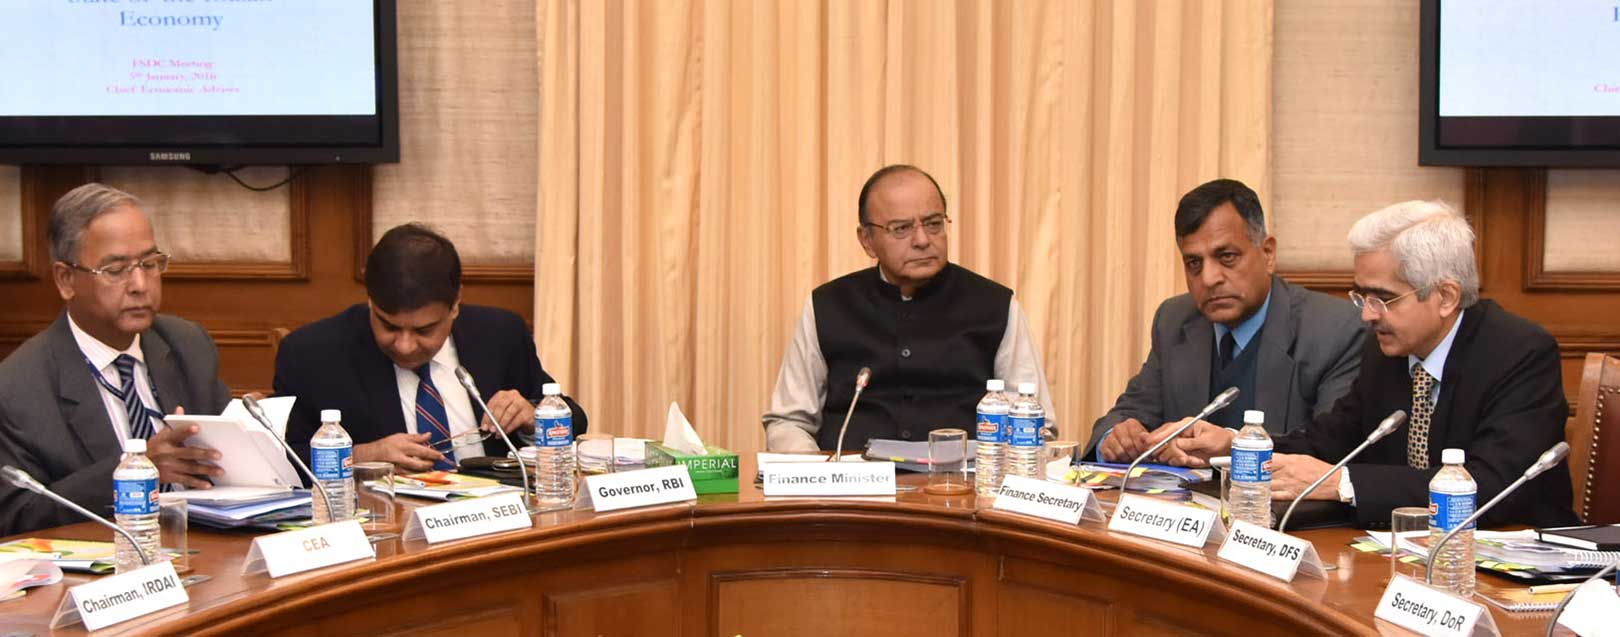 Finance Ministry clears 29 proposals involving Rs. 2.11 lakh crore of expenditure